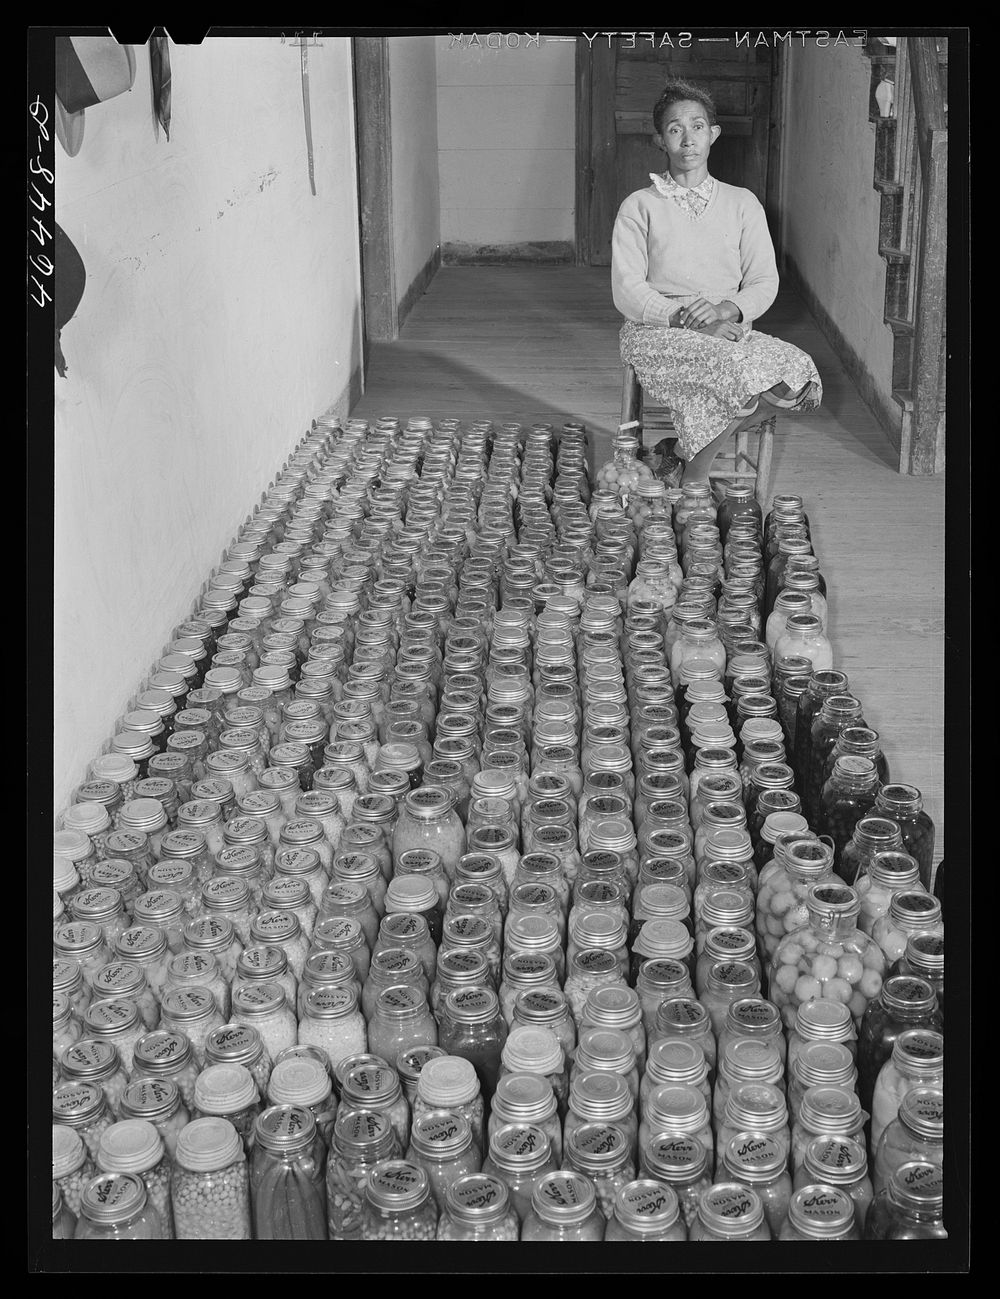 [Mrs. Edmond Reid], FSA (Farm Security Administration) client, with her canned goods. Oakland community, Greene County…